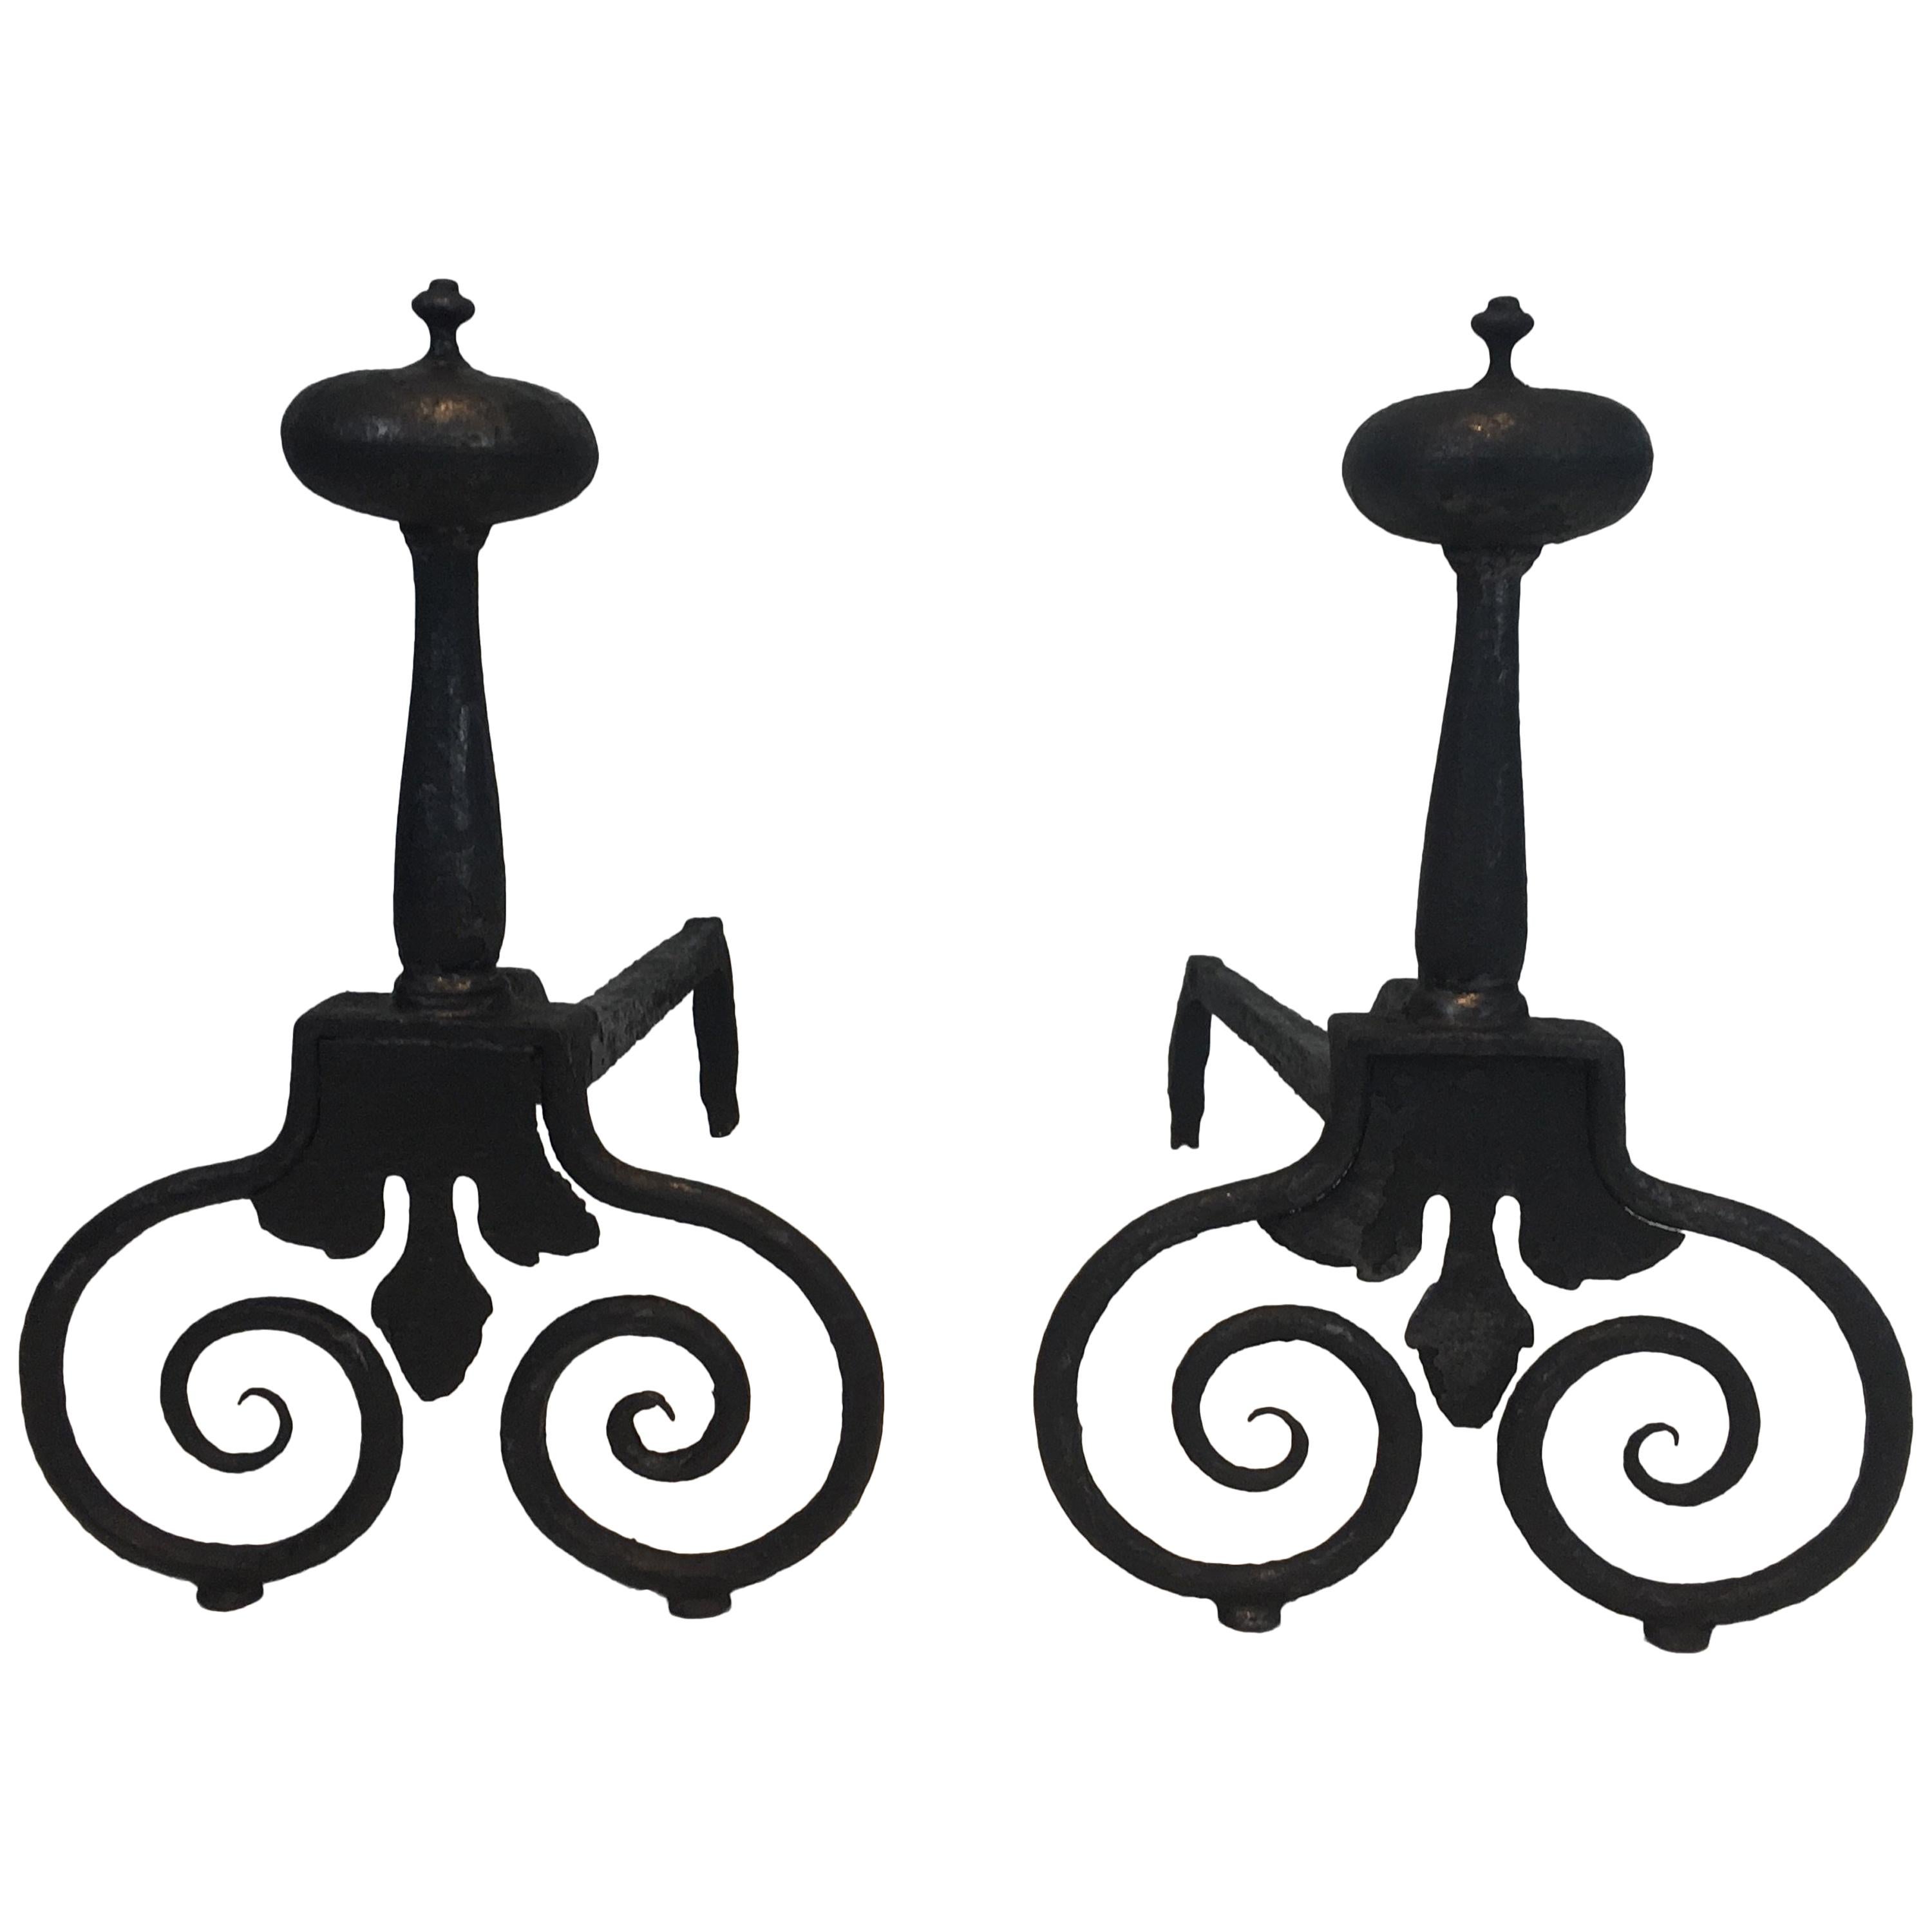 Pair of Wrought Iron Andirons, French, 18th Century 